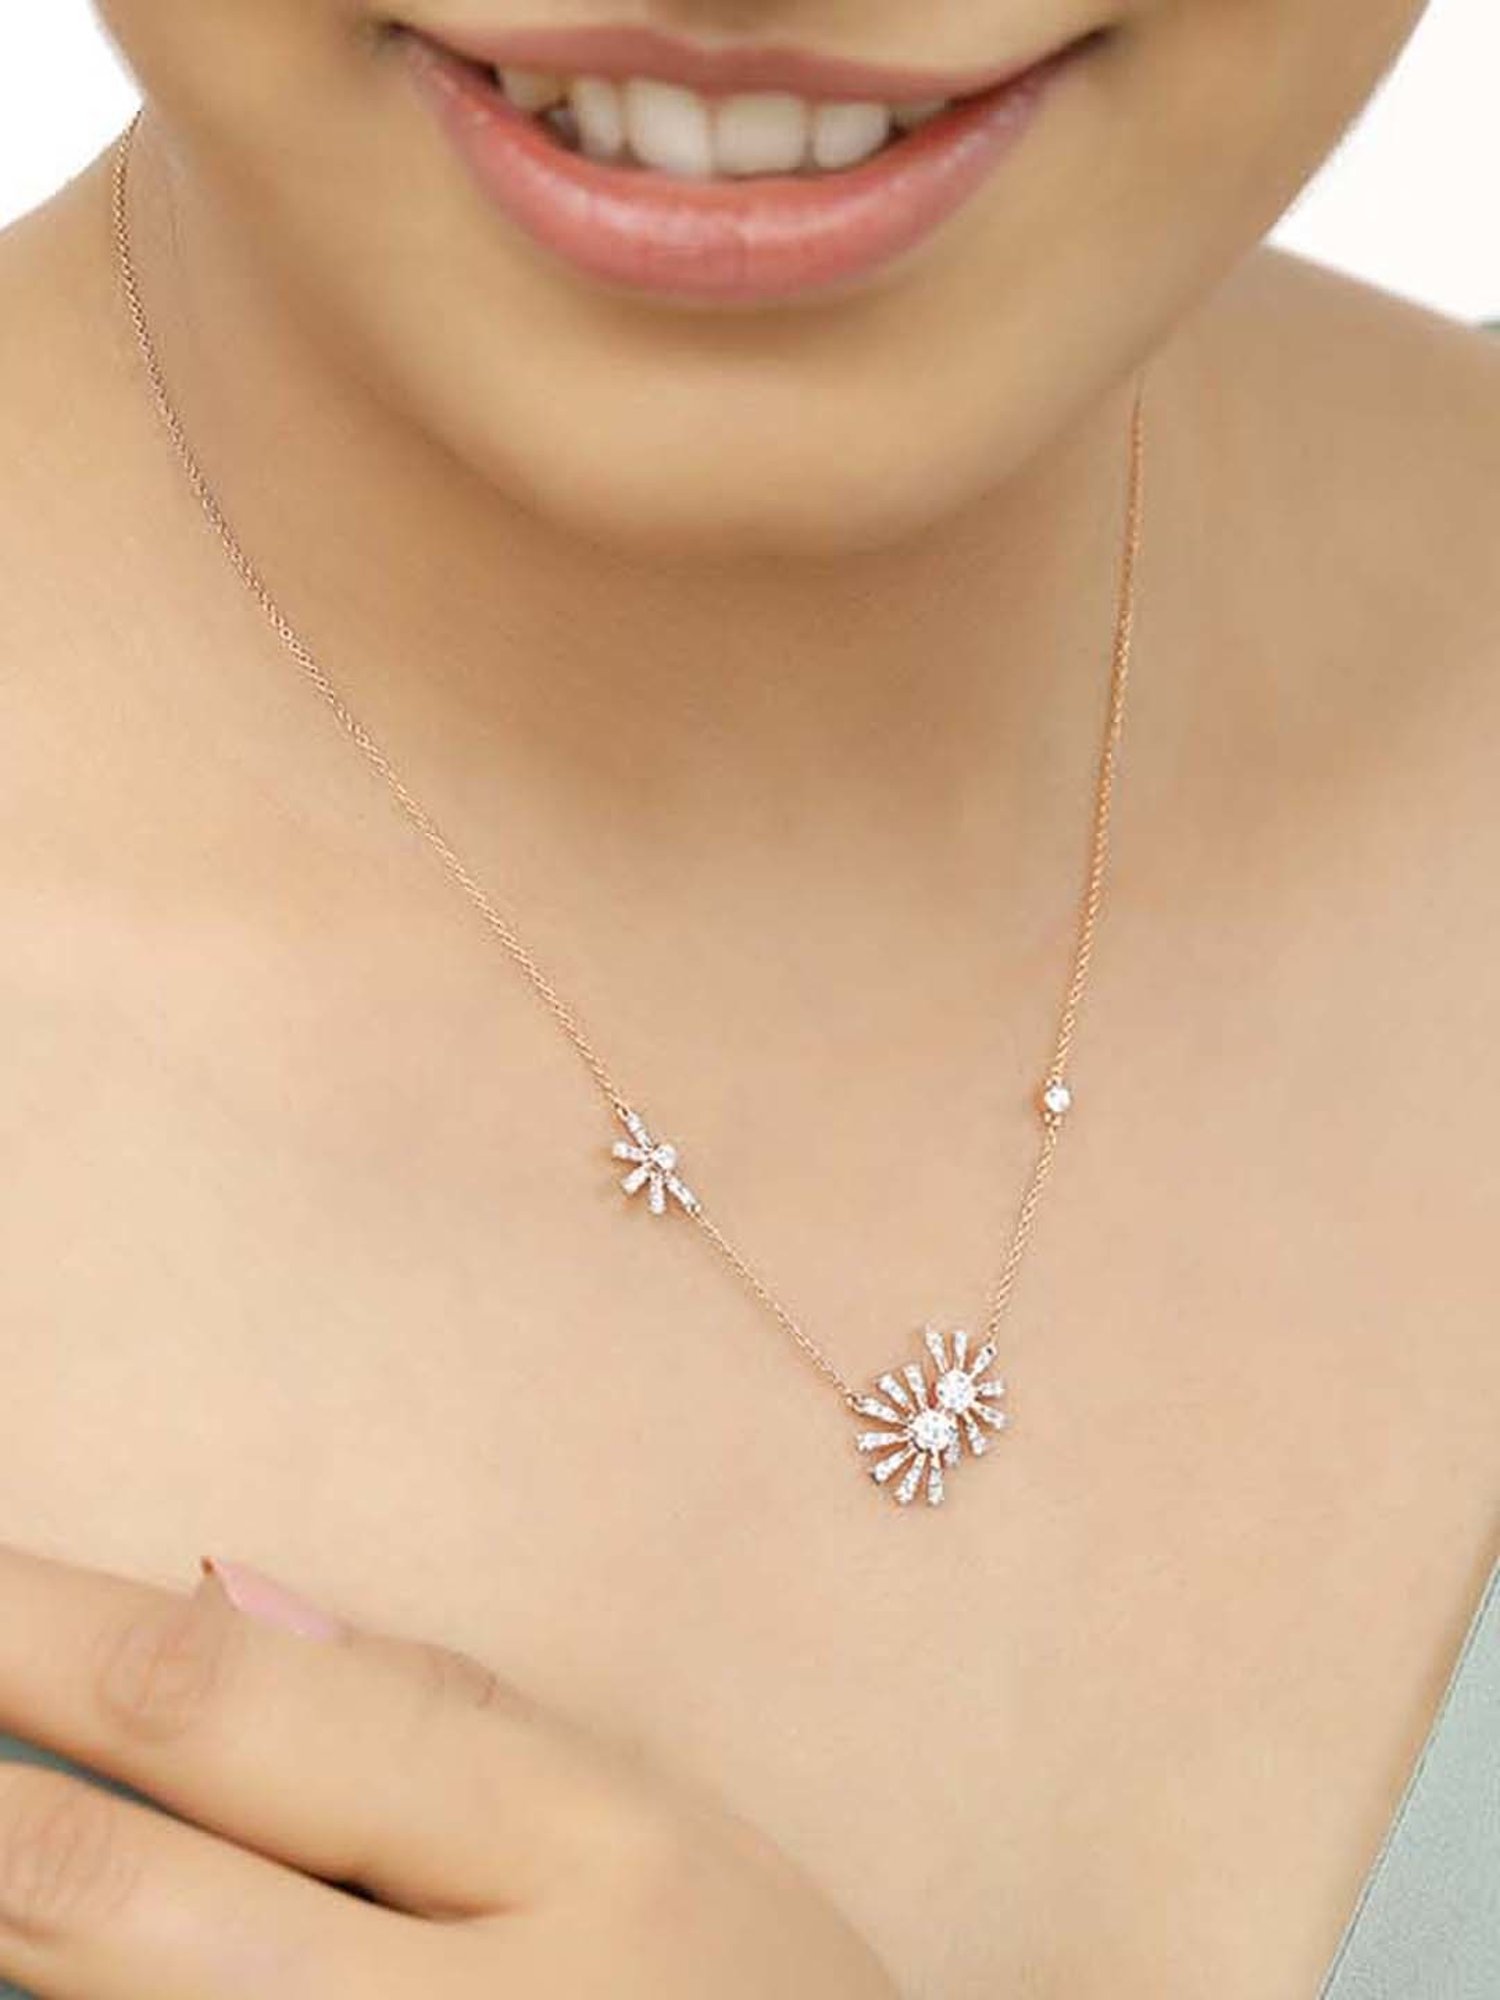 Buy P.N.Gadgil Jewellers Gold Dainty Daisy Necklace Online At Best Price @  Tata CLiQ